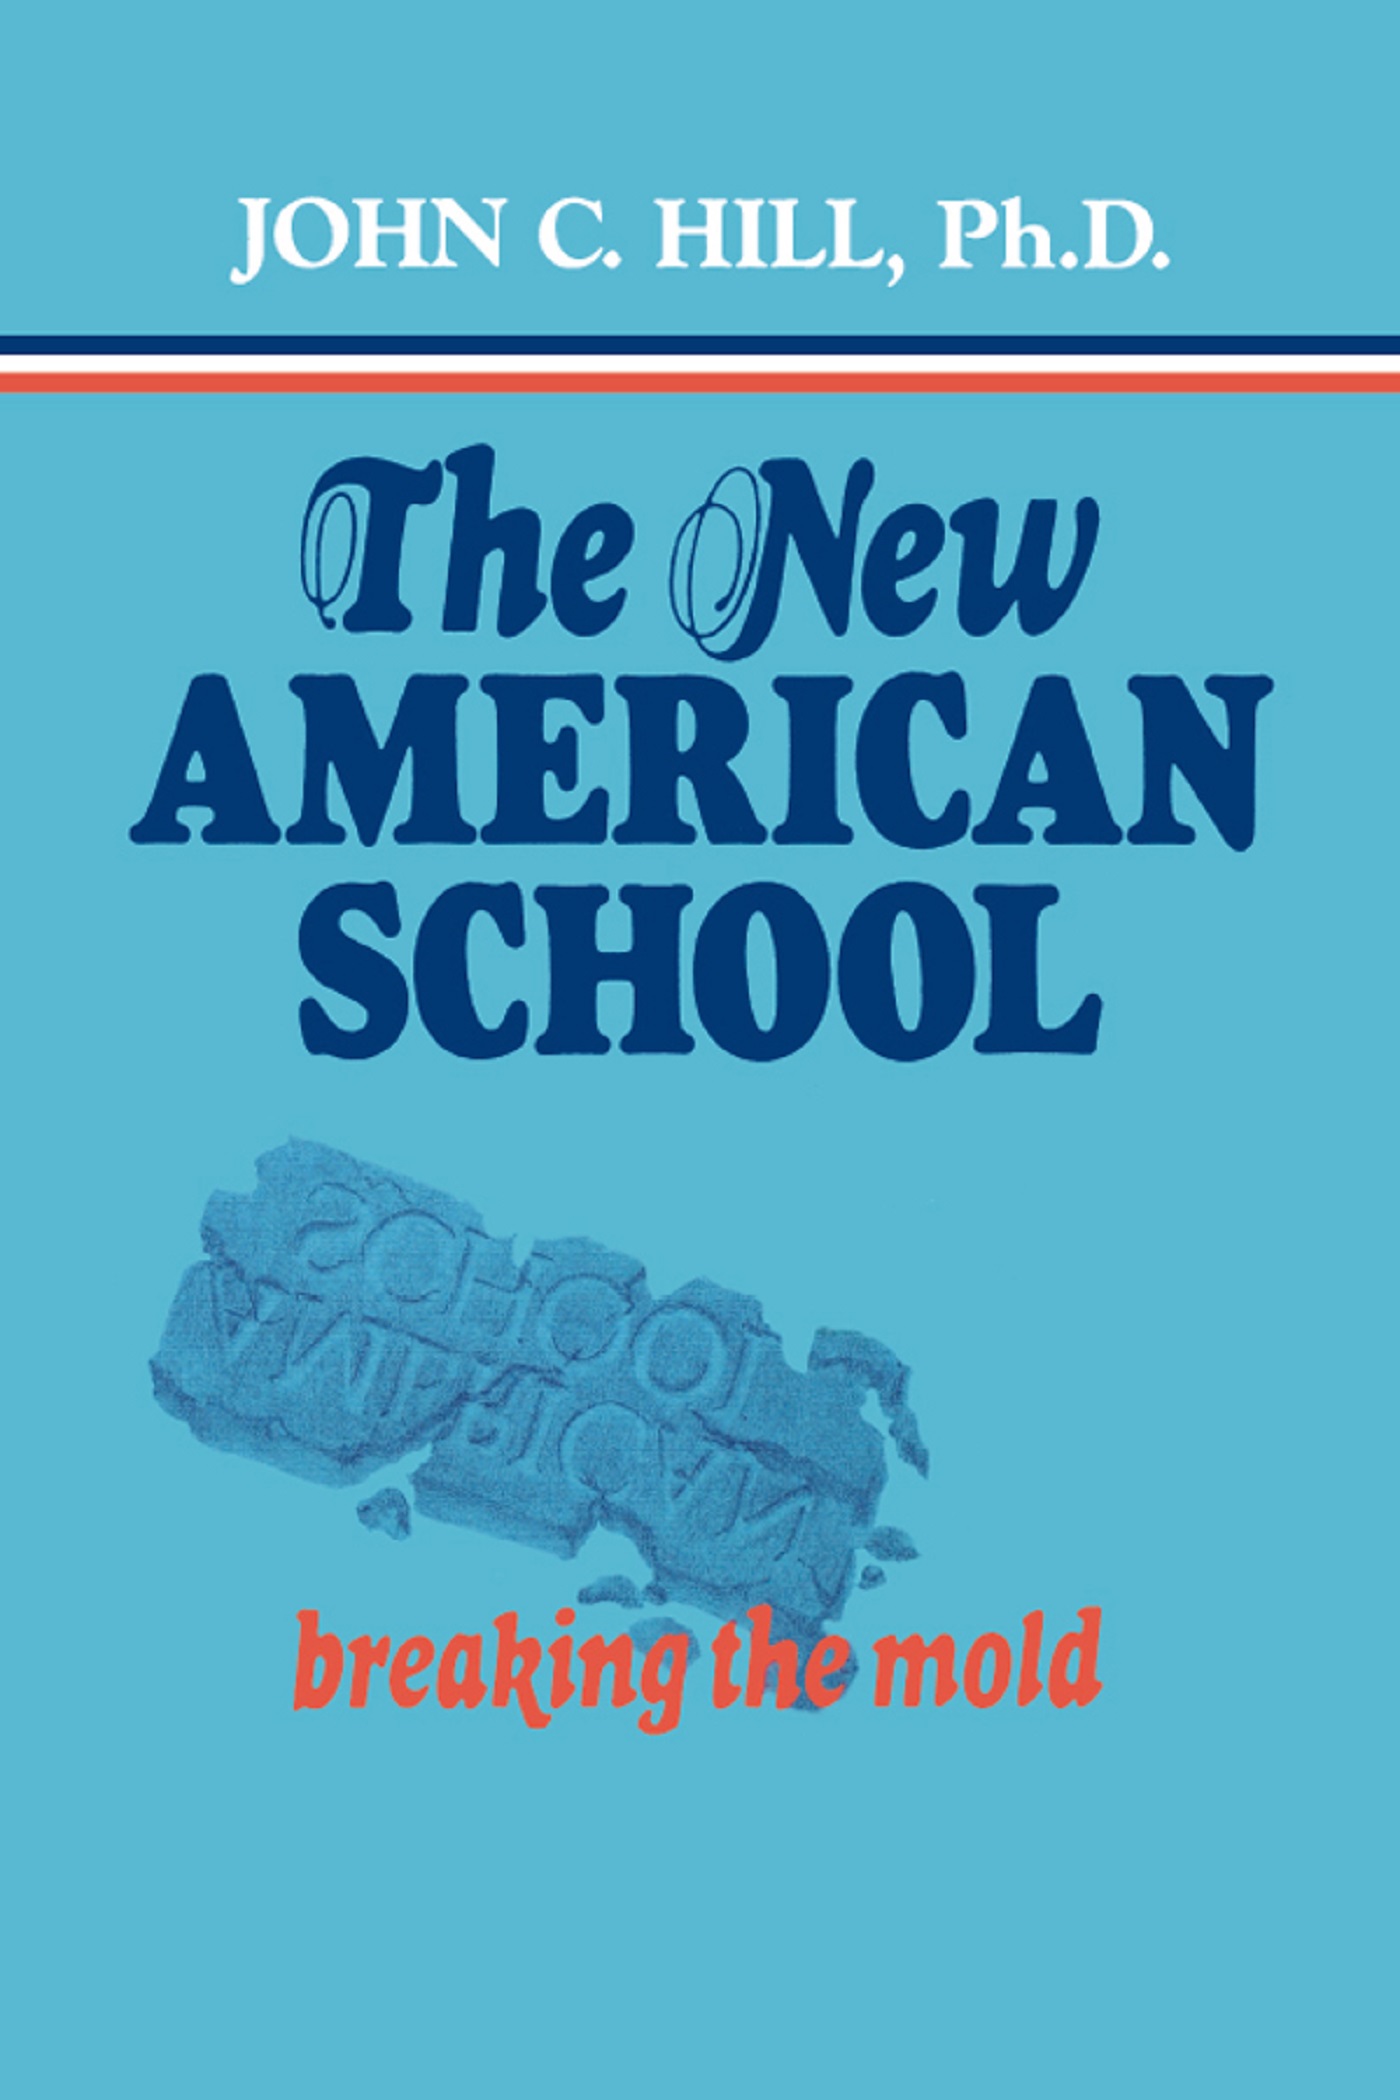 The New American School: Breaking the Mold